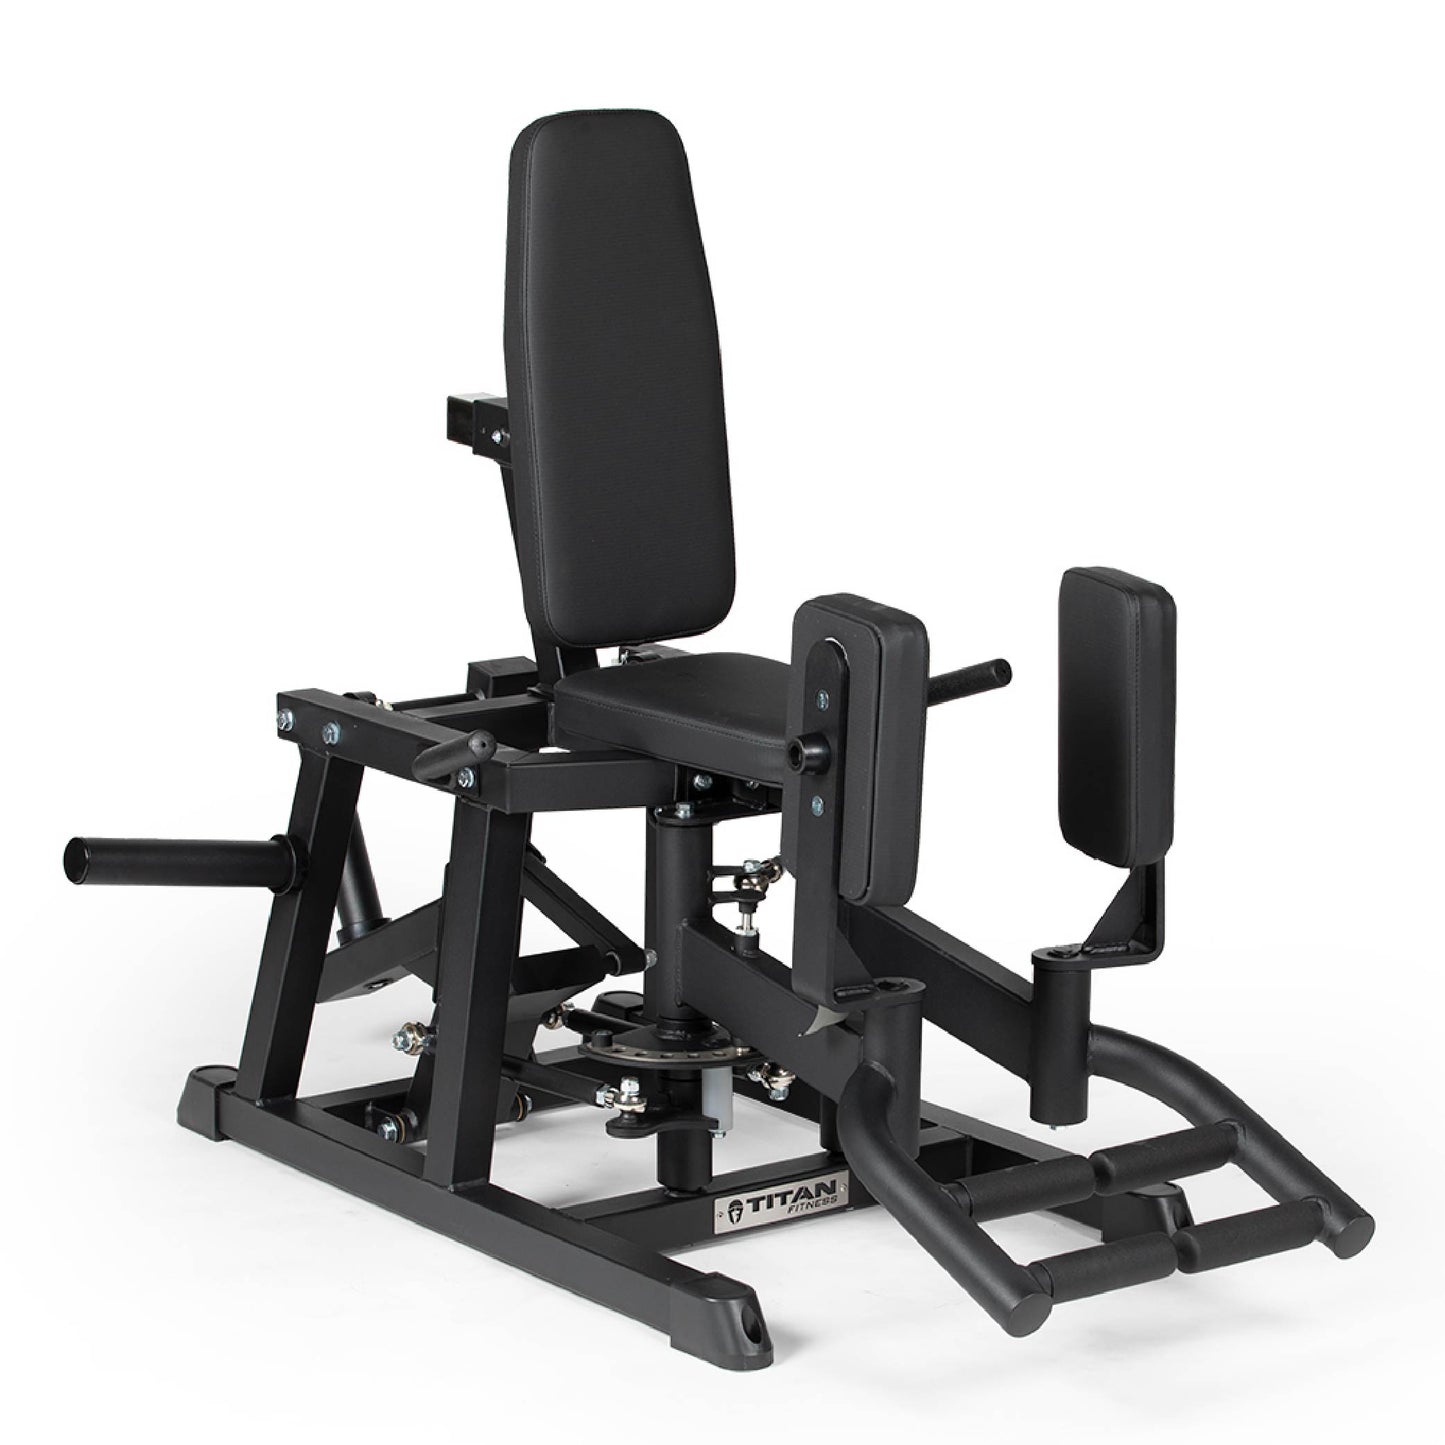 Plate-Loaded Hip Abductor And Adductor Exercise Machine - view 1